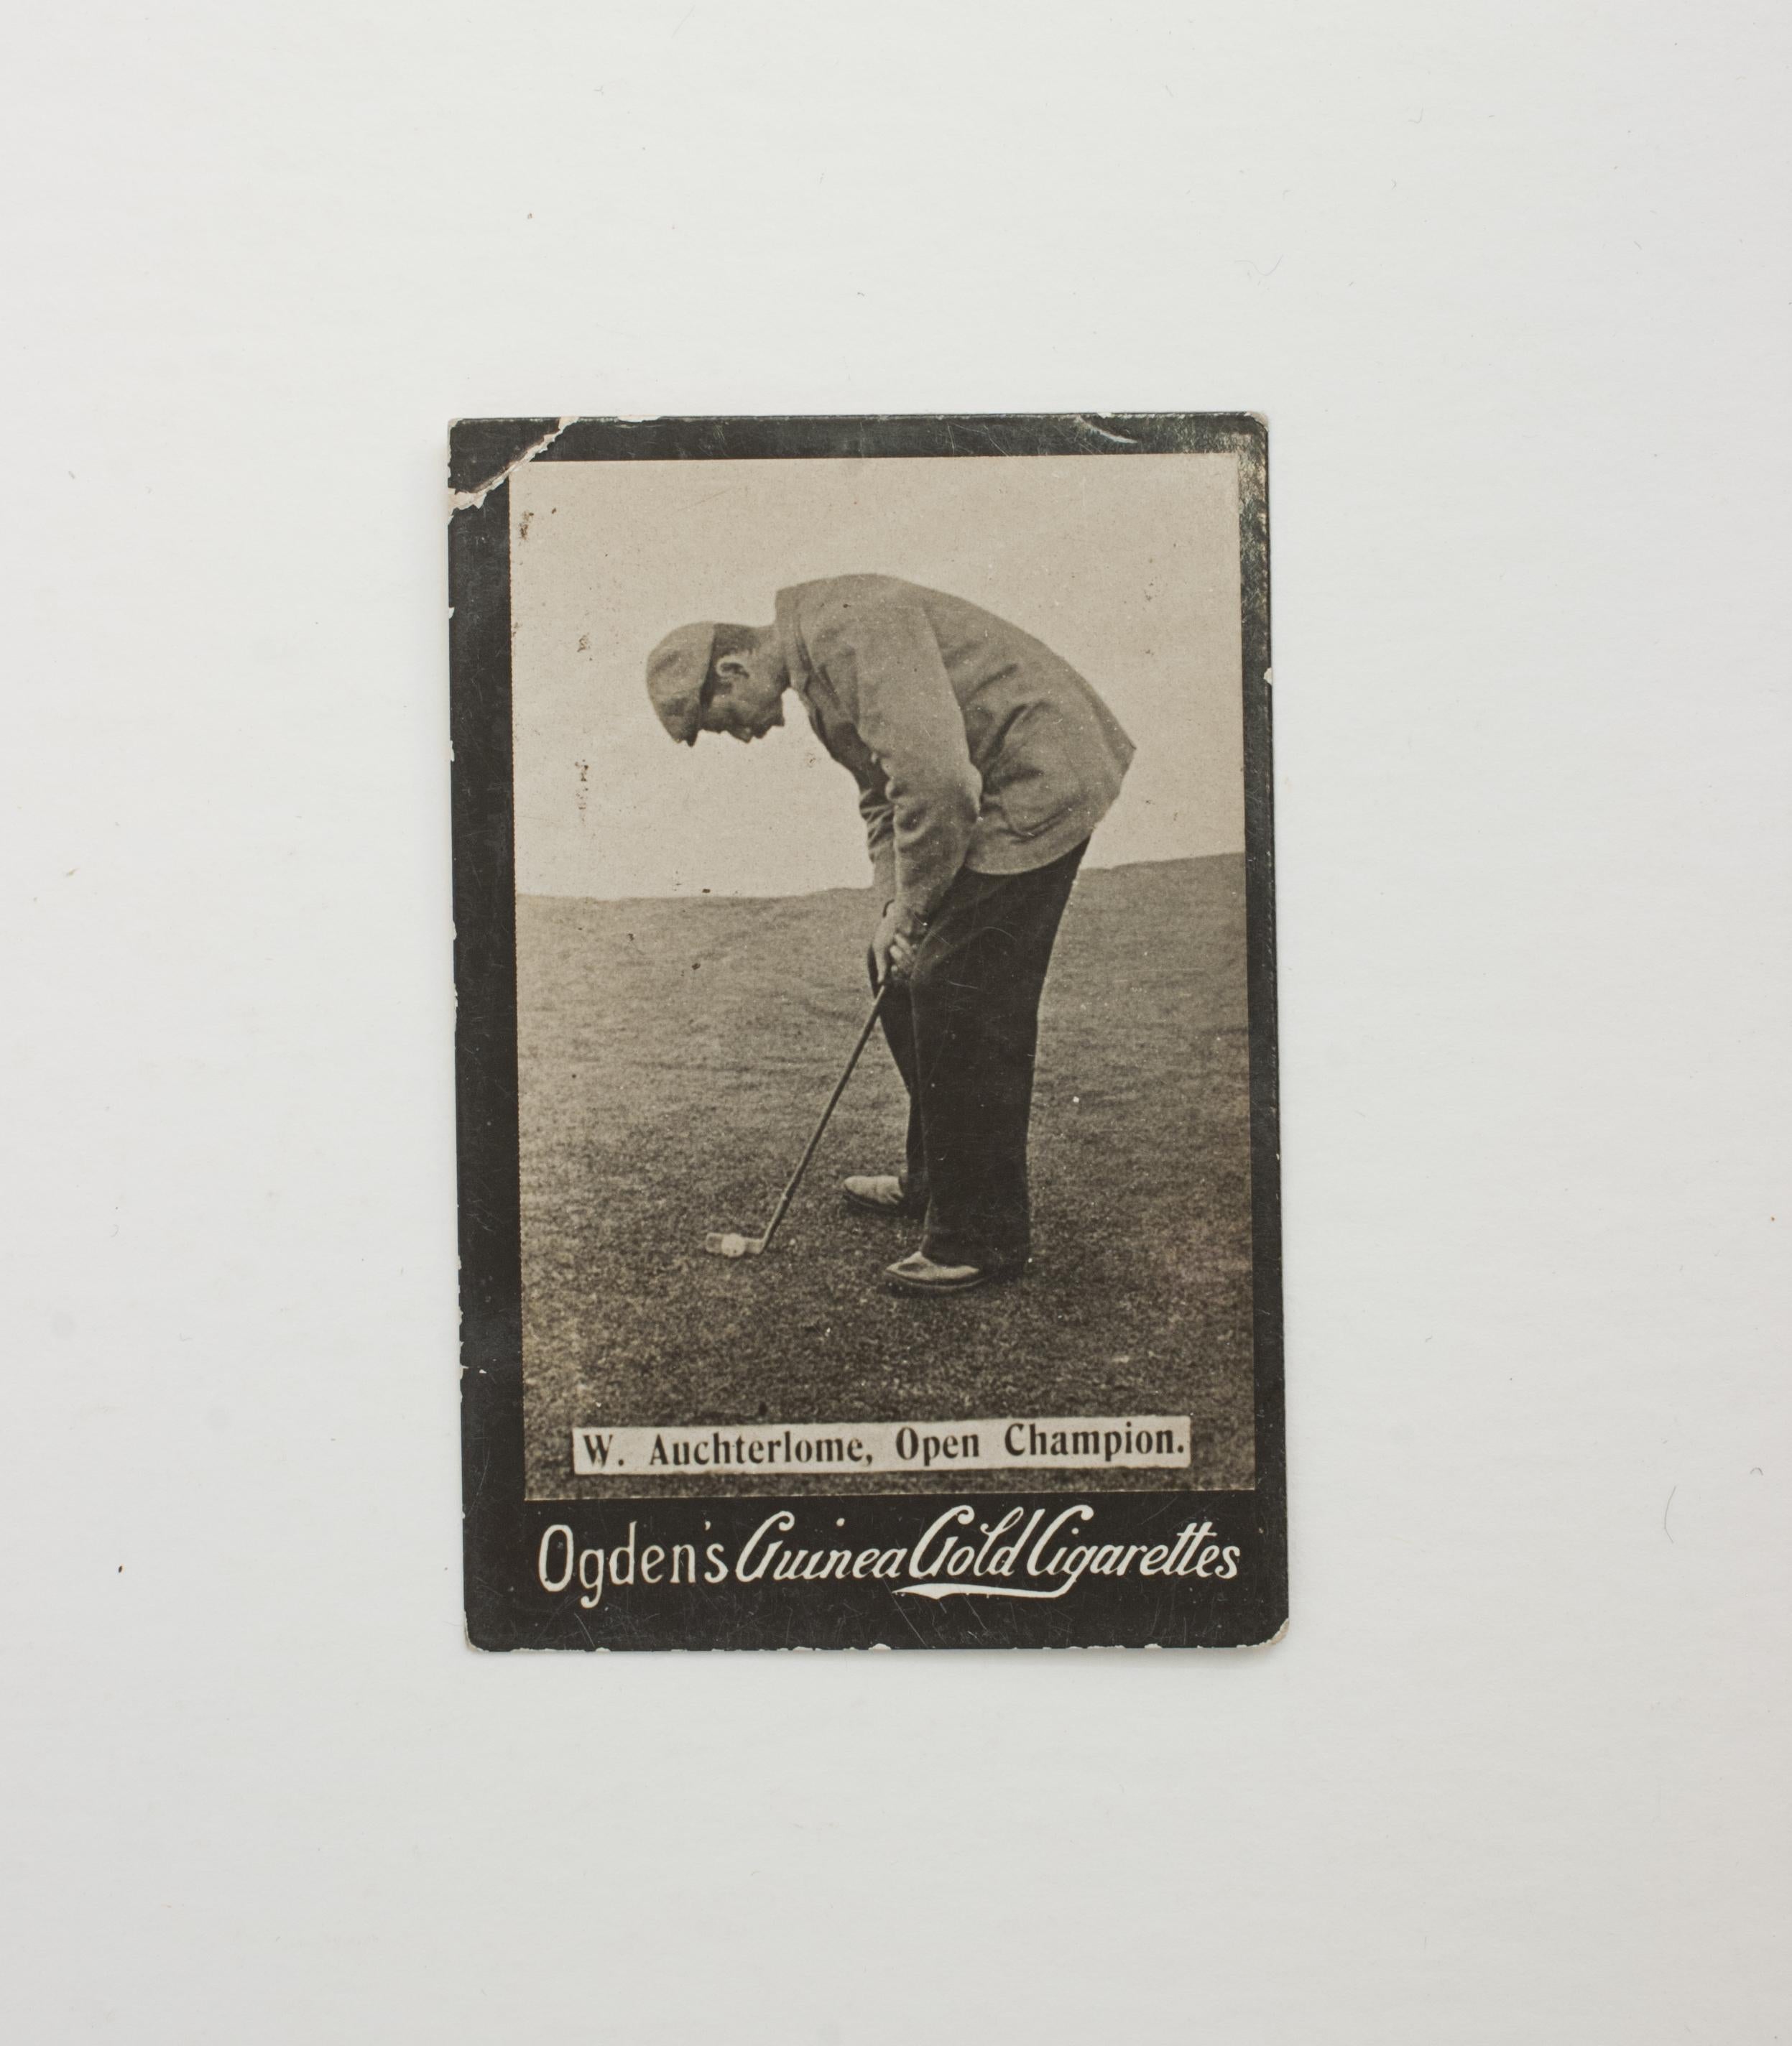 Fourteen Ogden Golf Cigarette Cards.
The collection of fourteen 'Ogden's Guinea Gold Cigarettes' card show twelve different professional male golfers, two are duplicates. The cards show posed photographic images of the golfers with distinctive black